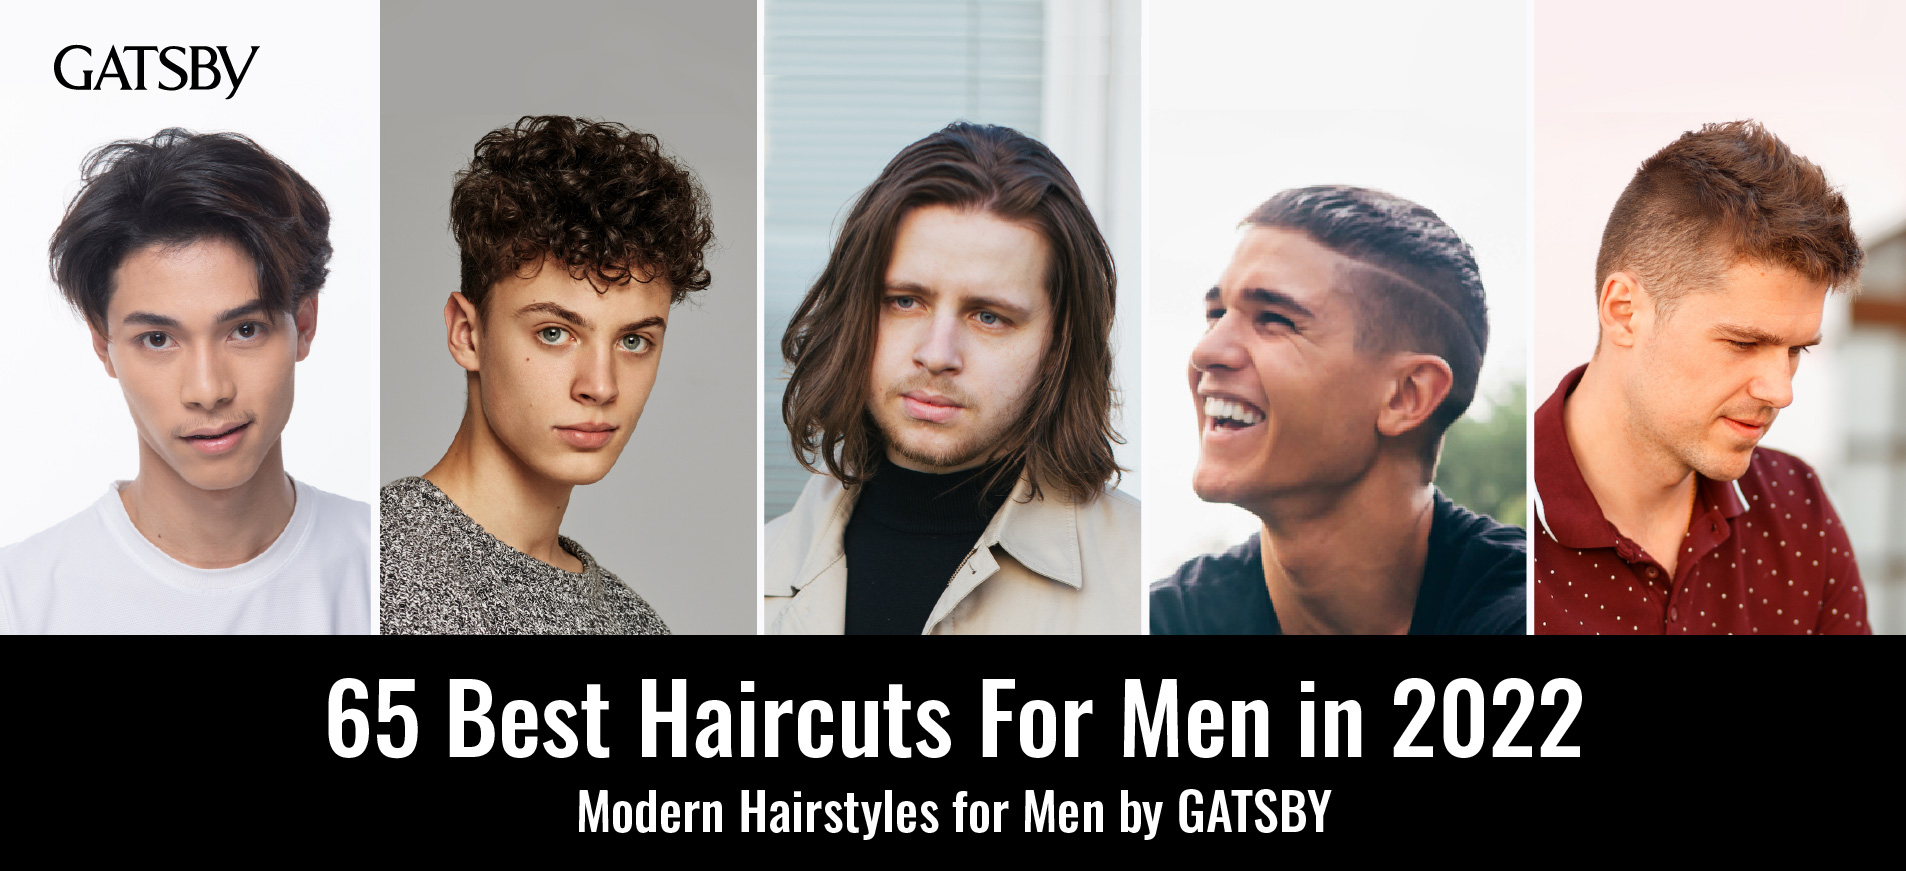 31 Awesome Professional Hairstyles for Men (2023 Trends)